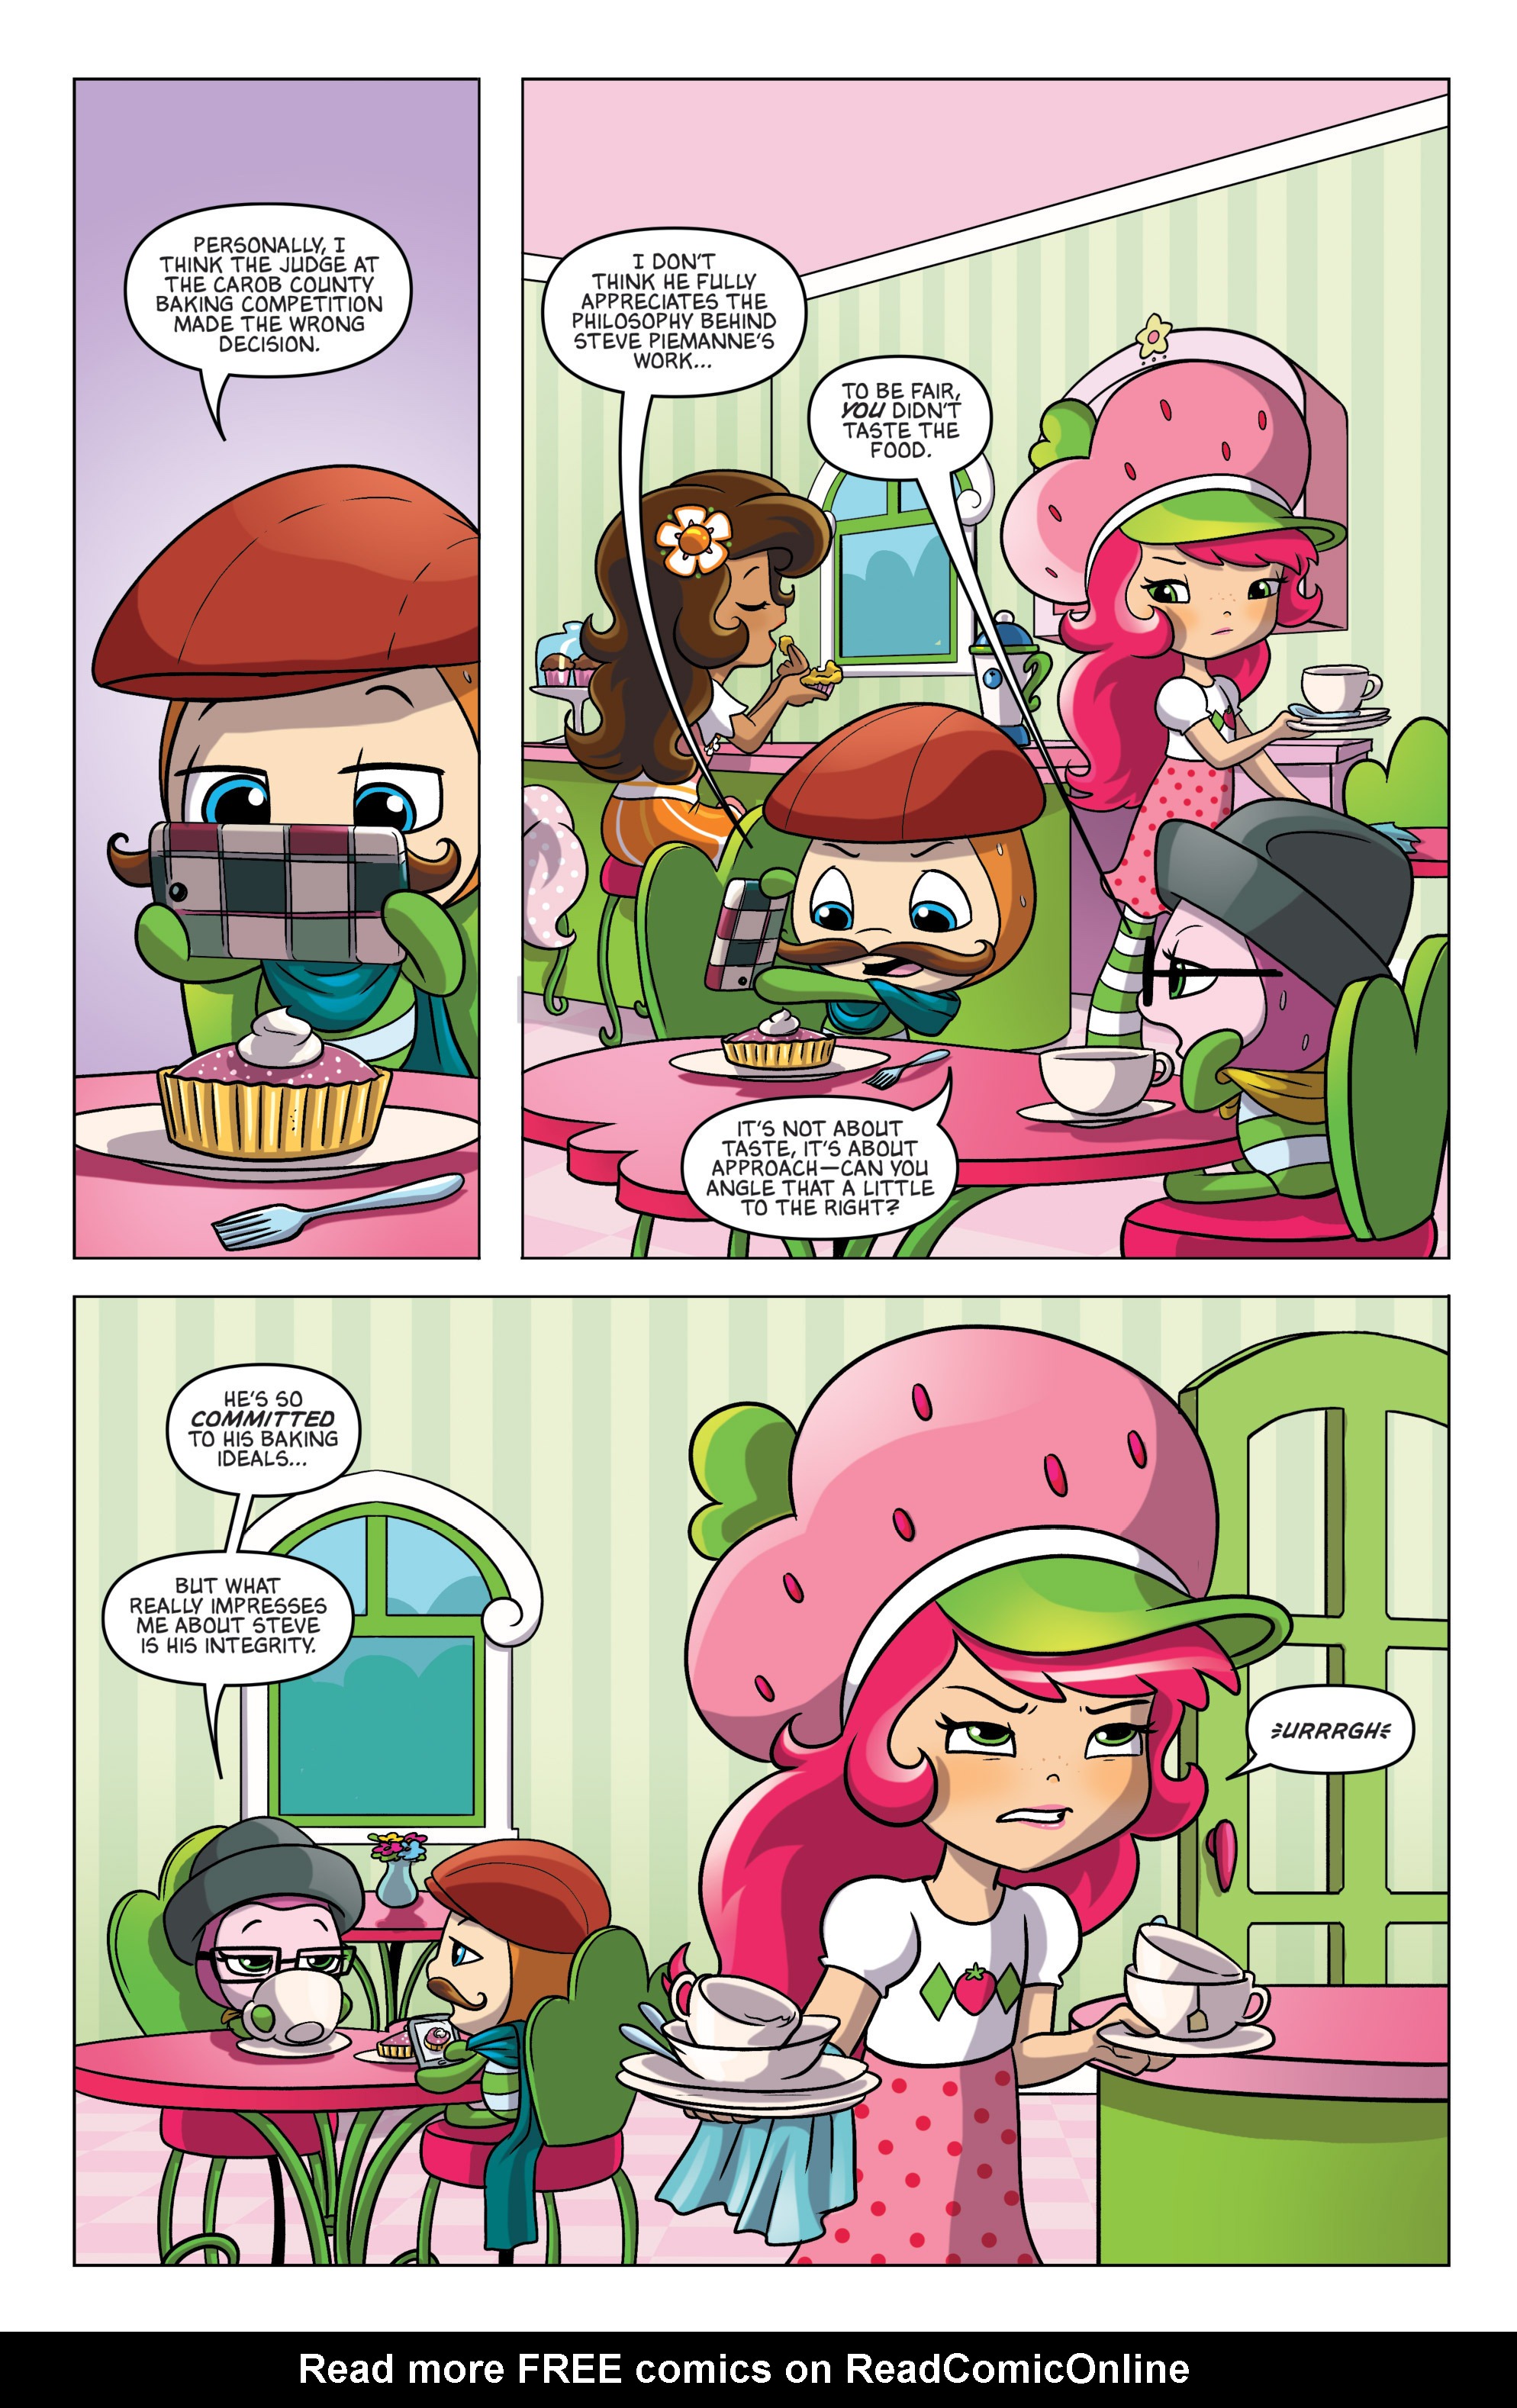 Strawberry Shortcake 2016 Issue 2 | Read Strawberry Shortcake 2016 Issue 2  comic online in high quality. Read Full Comic online for free - Read comics  online in high quality .|viewcomiconline.com